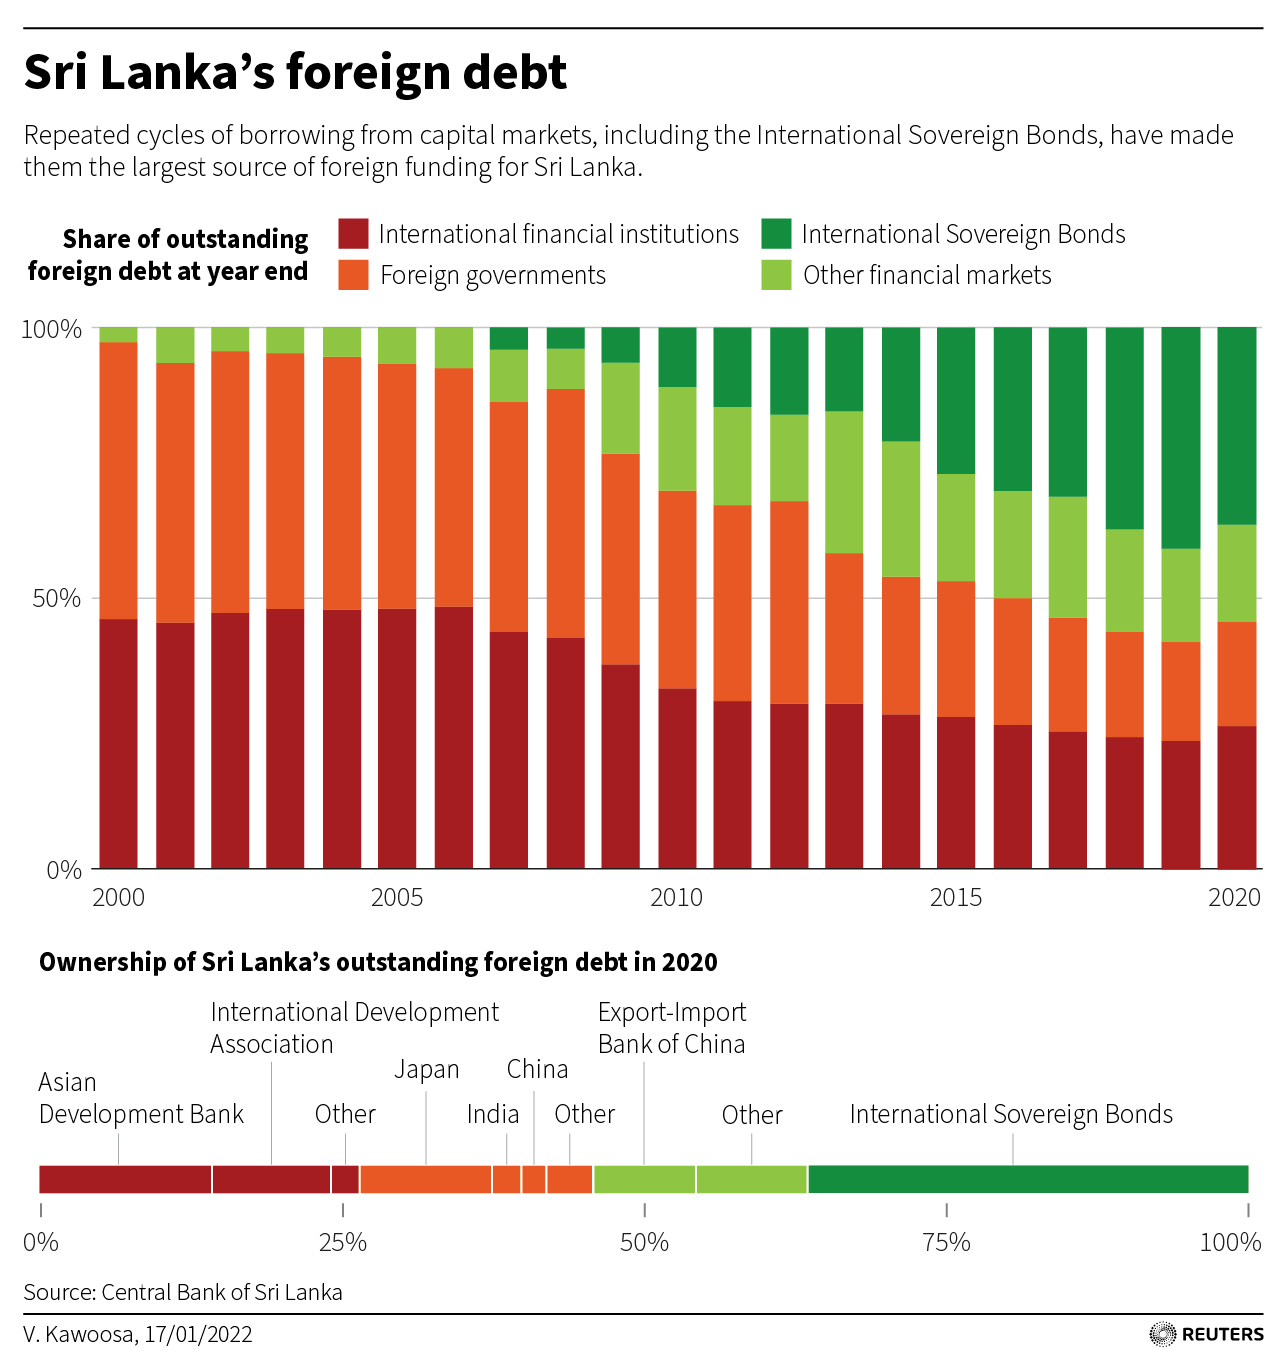 Repeated cycles of borrowing from capital markets, including the International Sovereign Bonds, have made them the largest source of foreign funding for Sri Lanka.